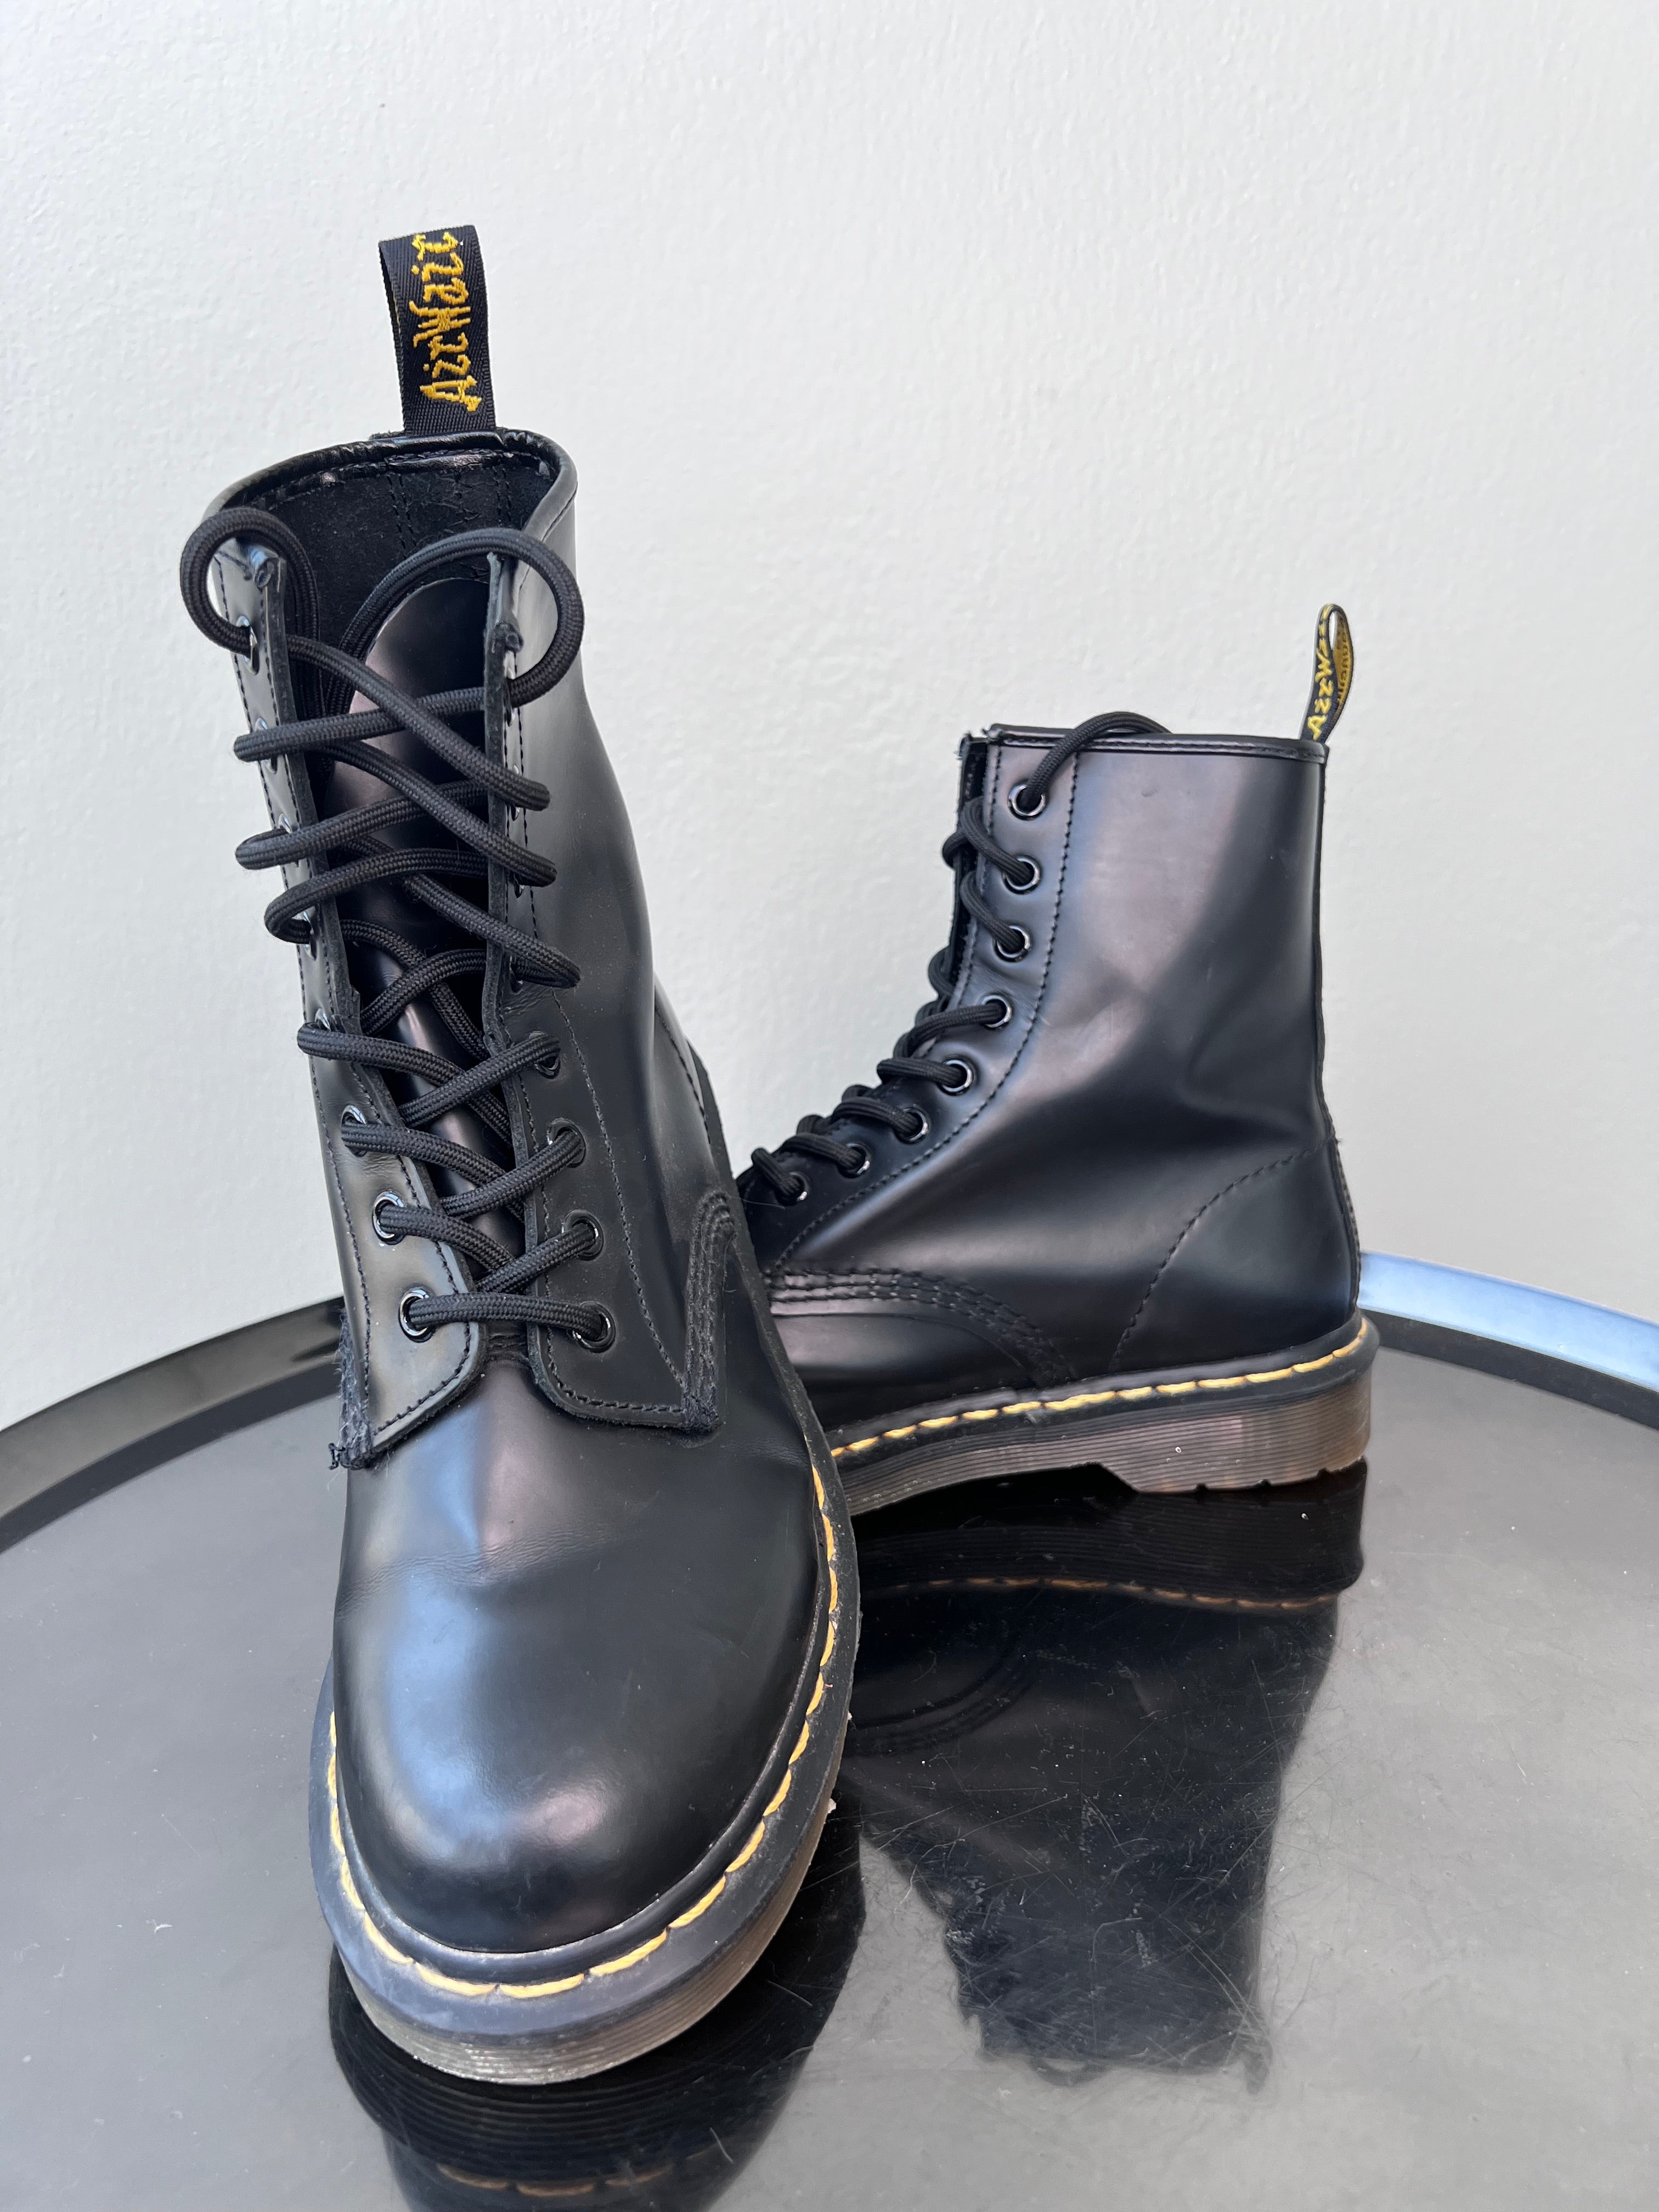 Black boots with yellow stitching- DOCMARTENS